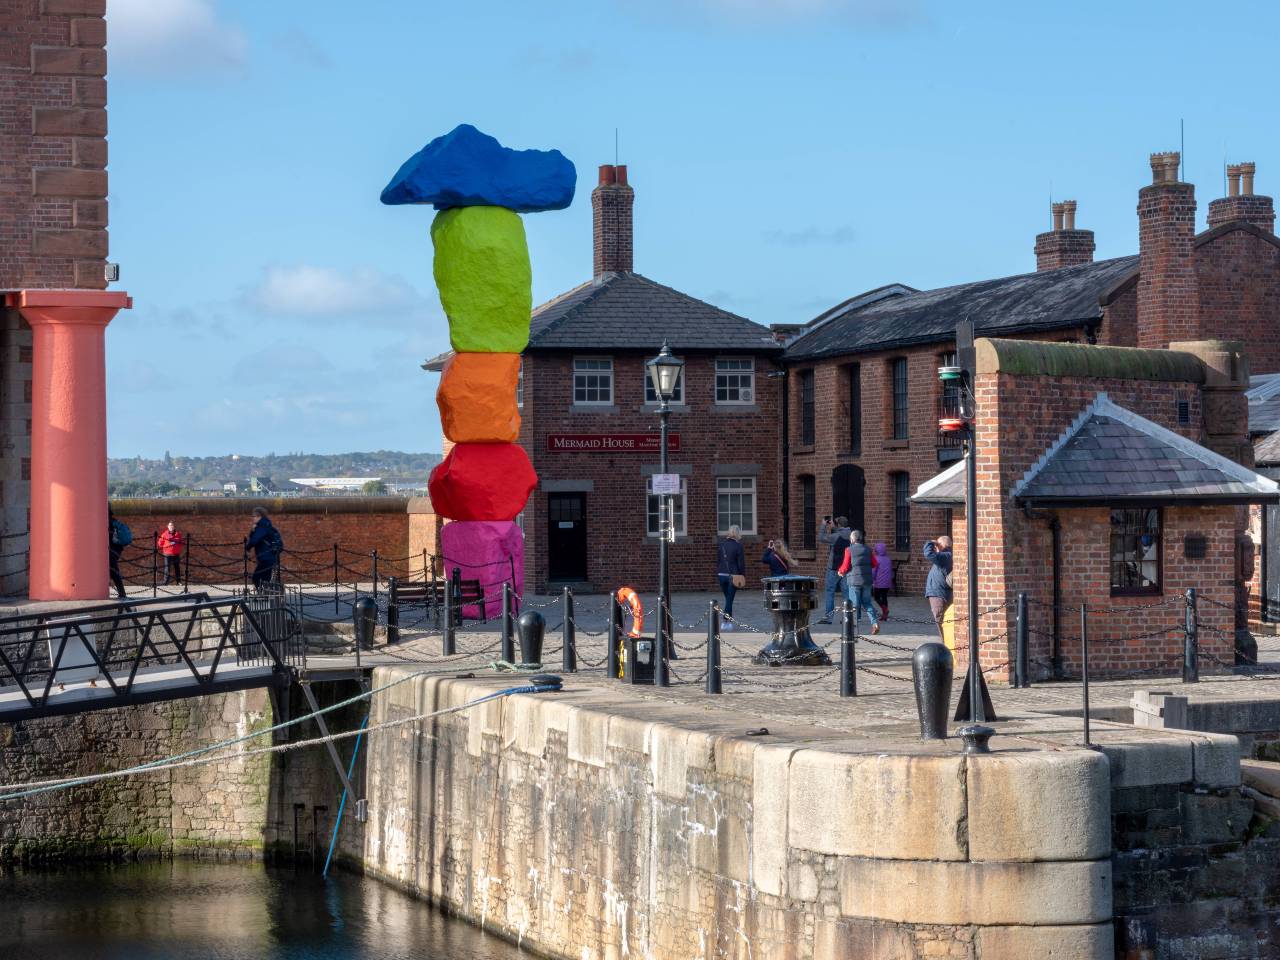 A 10-metre high sculpture on Liverpool’s waterfront, the sculpture consists of 5 vertically-stacked rocks painted in bright fluorescent colours